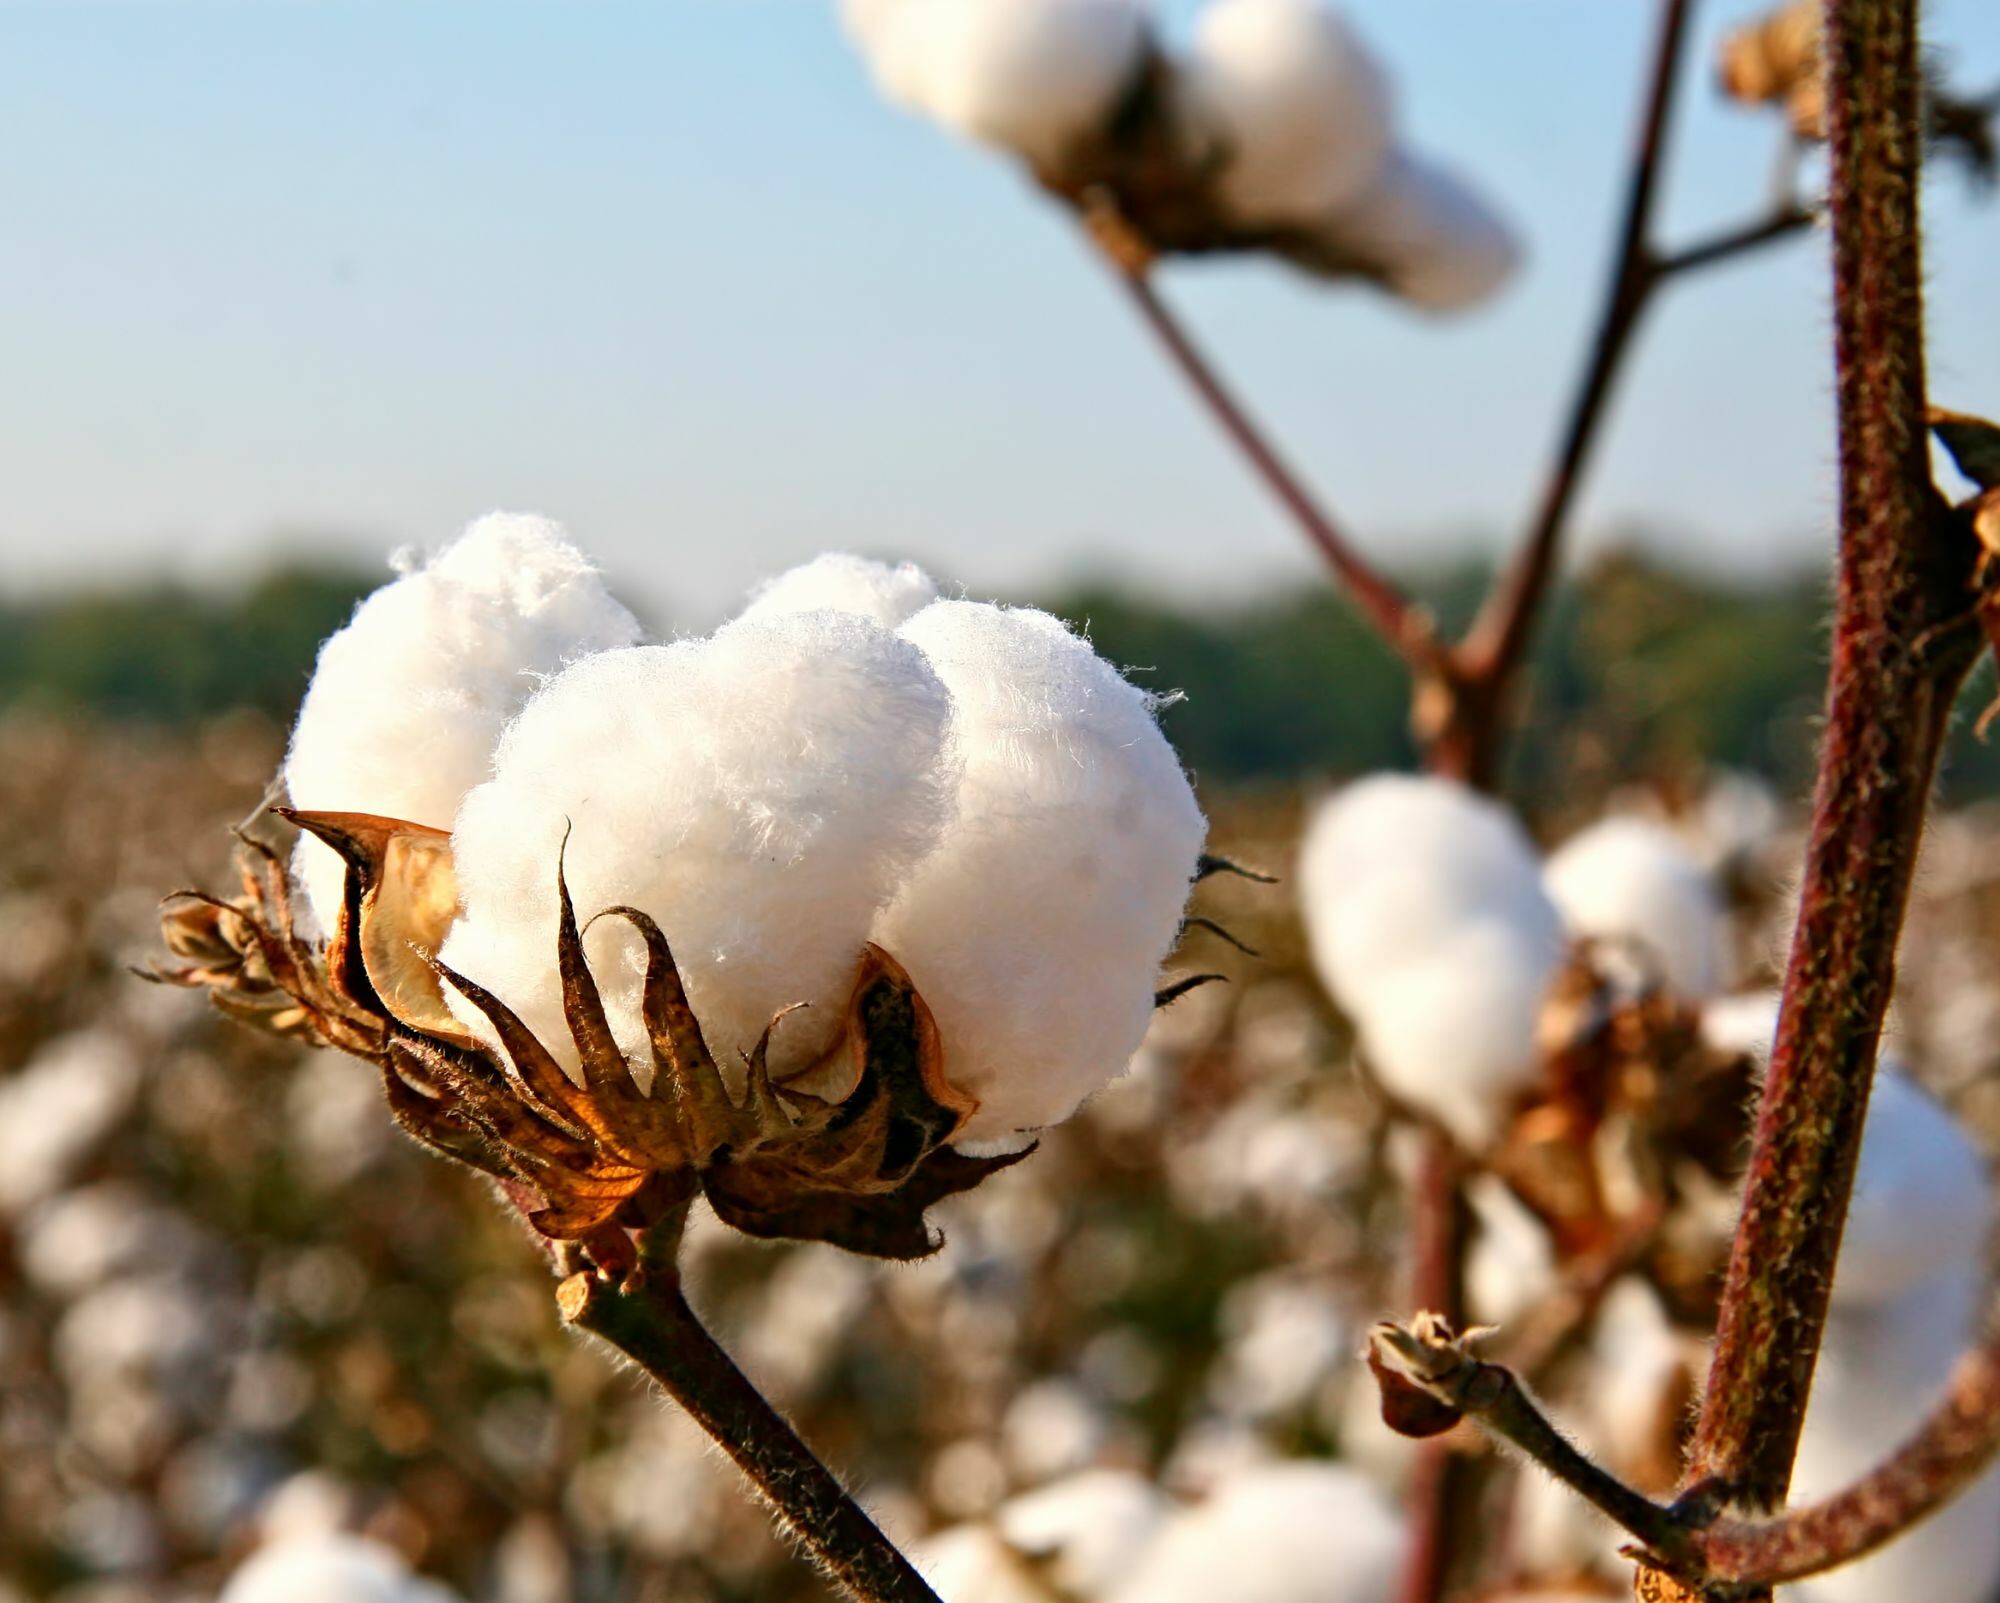 What Is The Difference Between Egyptian Cotton and Regular Cotton?